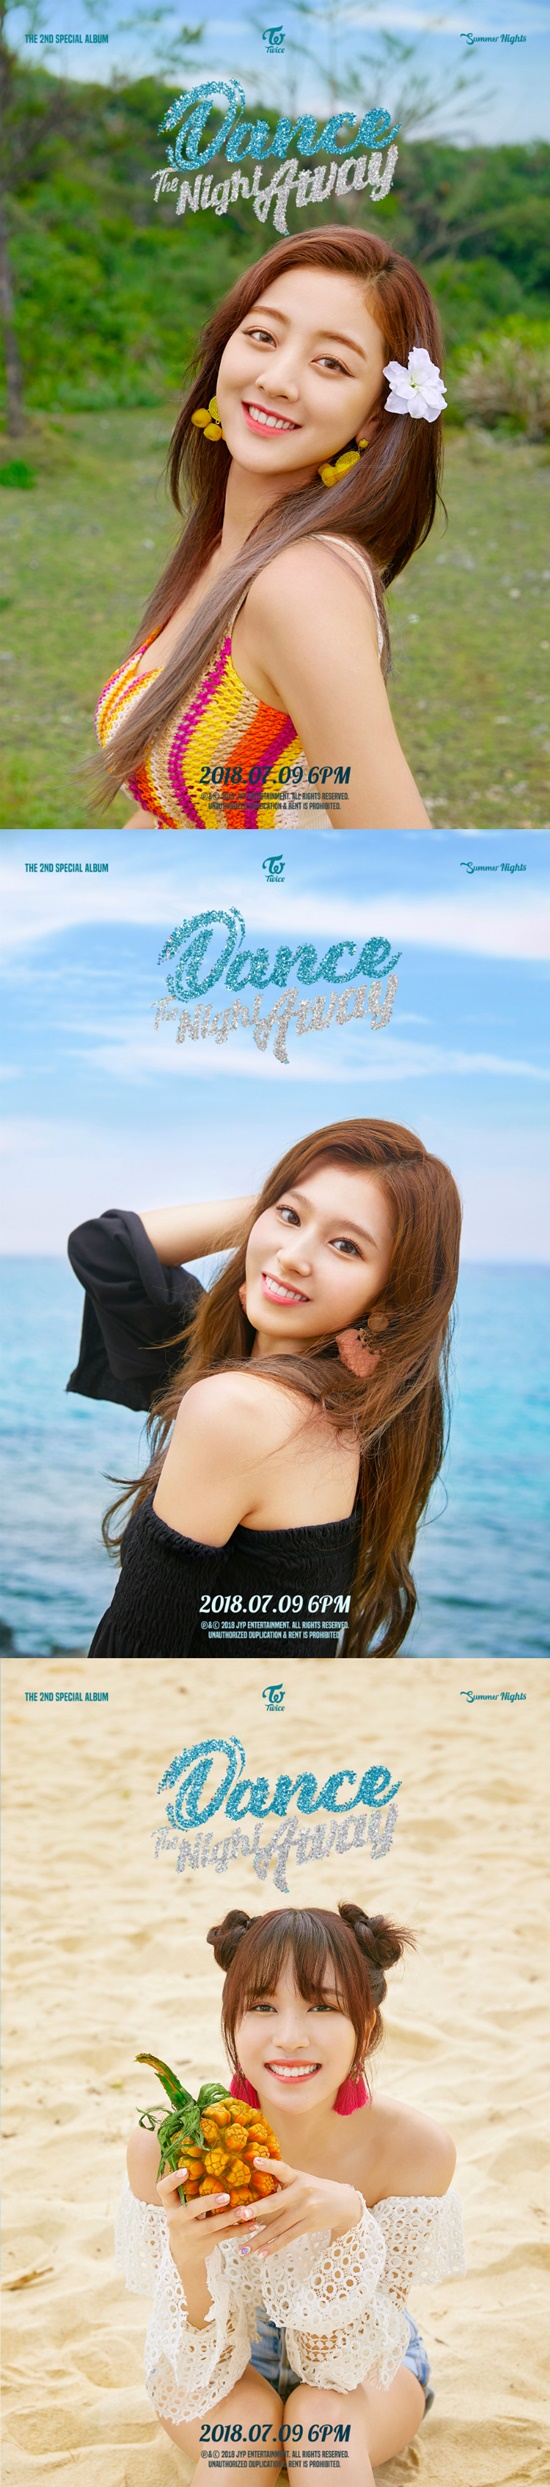 TWICE (TWICE) Sana, Jihyo and Mina released individual Teaser images with dazzling beauty, pre-eminently pre-eminently pre-eminently pre-eminently for the comeback.JYP Entertainment (hereinafter referred to as JYP) presented six second personal Teaser images of members Sana, Jihyo and Minas Dance the Nightstand Away on various SNS channels of JYP and TWICE at 0:00 on the 4th.Following the personal Teaser of Nayeon, Jung Yeon and MOMO released on March 3, Sana, Jihyo and Mina showed off their beauty more than the sun in the background of beaches and green islands, raising expectations for the concept of Dance the Nightstand Lee Jin-hyuk.In the Teaser, Sana has a sophisticated and feminine look with black & white beachwear.Jihyo, who has a colorful top and bright flower hair accessories, gave a refreshing feeling with a bright smile.Mina revealed her innocence with a white frill blouse, adding a cute charm with a round-rolled hairstyle on both sides.JYP is thrilling fans with a variety of comeback teeing content ahead of TWICEs new album India Summer Nightstand and the title song Dance the Nightstand Lee Jin-hyuk on the 9th.Following the first individual Teaser with the concept of the party girl last summer night, the second individual Teaser of the India Summer Girl concept is being opened, and various Teasers will be released as relays to suggest the atmosphere of Dance the Nightstand Lee Jin-hyuk.TWICEs new album India Summer Nightstand includes three new songs, including the title track Dance the Nightstand Lee Jin-hyuk, CHILLAX and Shot through the heart and the mini-five album Wat Orange Is the New Black L. Ove?(What is Love?) , which contains a total of 9Tracks.Shot Through the Heart is a song by TWICE members MOMO, Sana and Mina as lyricists.This is the first time that three members will be responsible for the song of TWICEs new song, which will be a special track for fans.Especially, the song Dance the Nightstand Lee Jin-hyuk is written by senior singer Wheesung, and a new combination called TWICE X Wheesung is concluded.Wheesung, who has been responsible for the lyrics of big hits such as Yoonhas Secret Number 486, Tiaras Crazy Because of You and Ailees Heaven, will be able to double the fresh and youthful charm of TWICE with what song through Dance the Nightstand Lee Jin-hyuk.TWICE was followed by SIGNAL last year, followed by What Orange Is the New Black Love that the Best of Best combination of Park Jin-young X TWICE met again?was released in April.This song has set a new record of 8 consecutive 100 million views exceeding 100 million views on YouTube, following various online music sources such as real time, daily, weekly charts, 4 Gaon charts, and 12 music ranking programs.TWICE announces its 9th consecutive popular march with the comeback song Dance the Nightstand Lee Jin-hyuk in three months.TWICEs new song Dance the Nightstand Lee Jin-hyuk, which is expected to be born every summer vacation season, will be released on each music site at 6 pm on the 9th.Photo: JYP